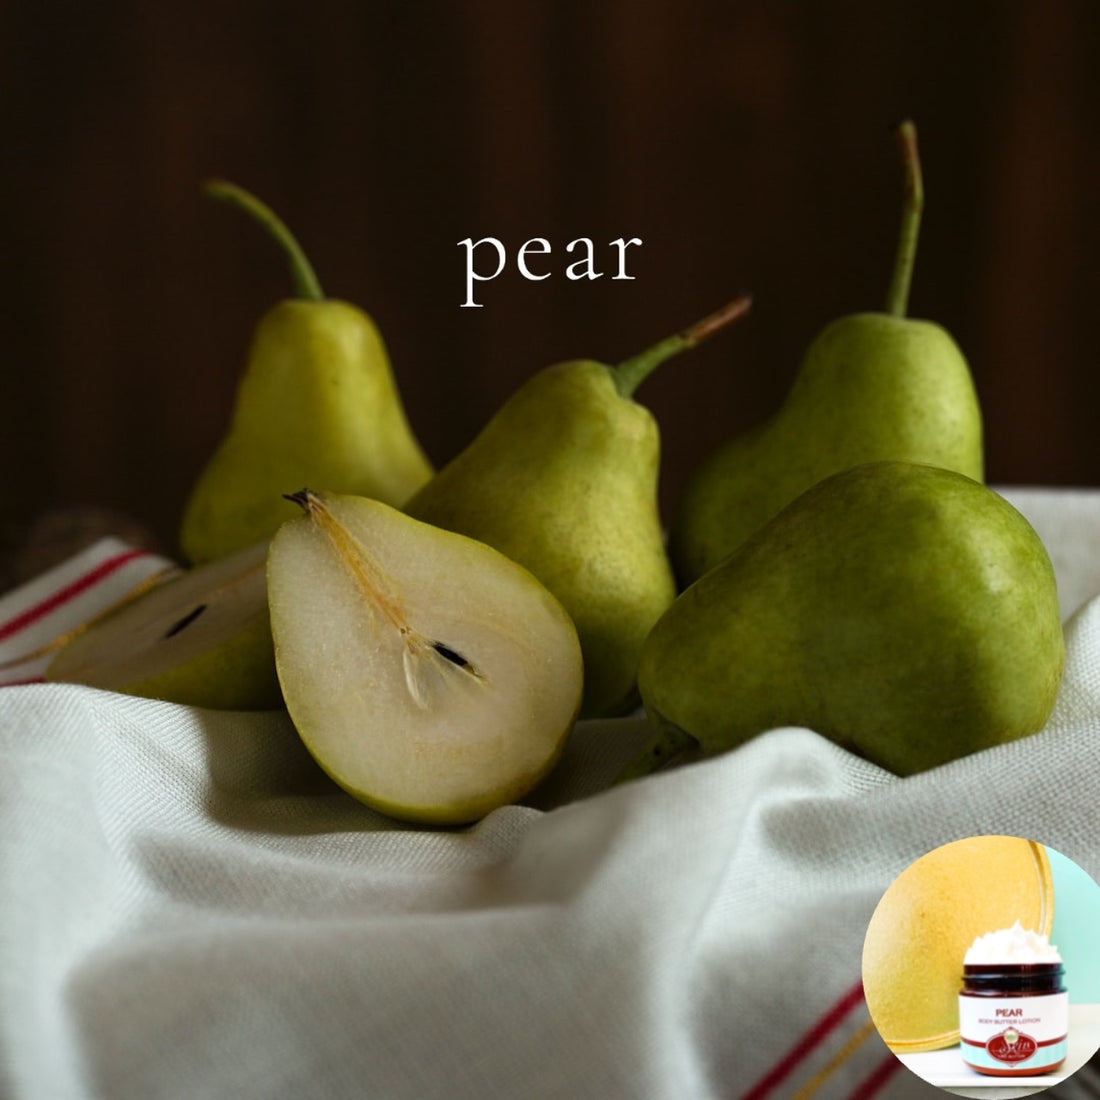 PEAR scented Body Butter - BOGO - Buy  One 16 oz family size, get 1 any size 50% off deal